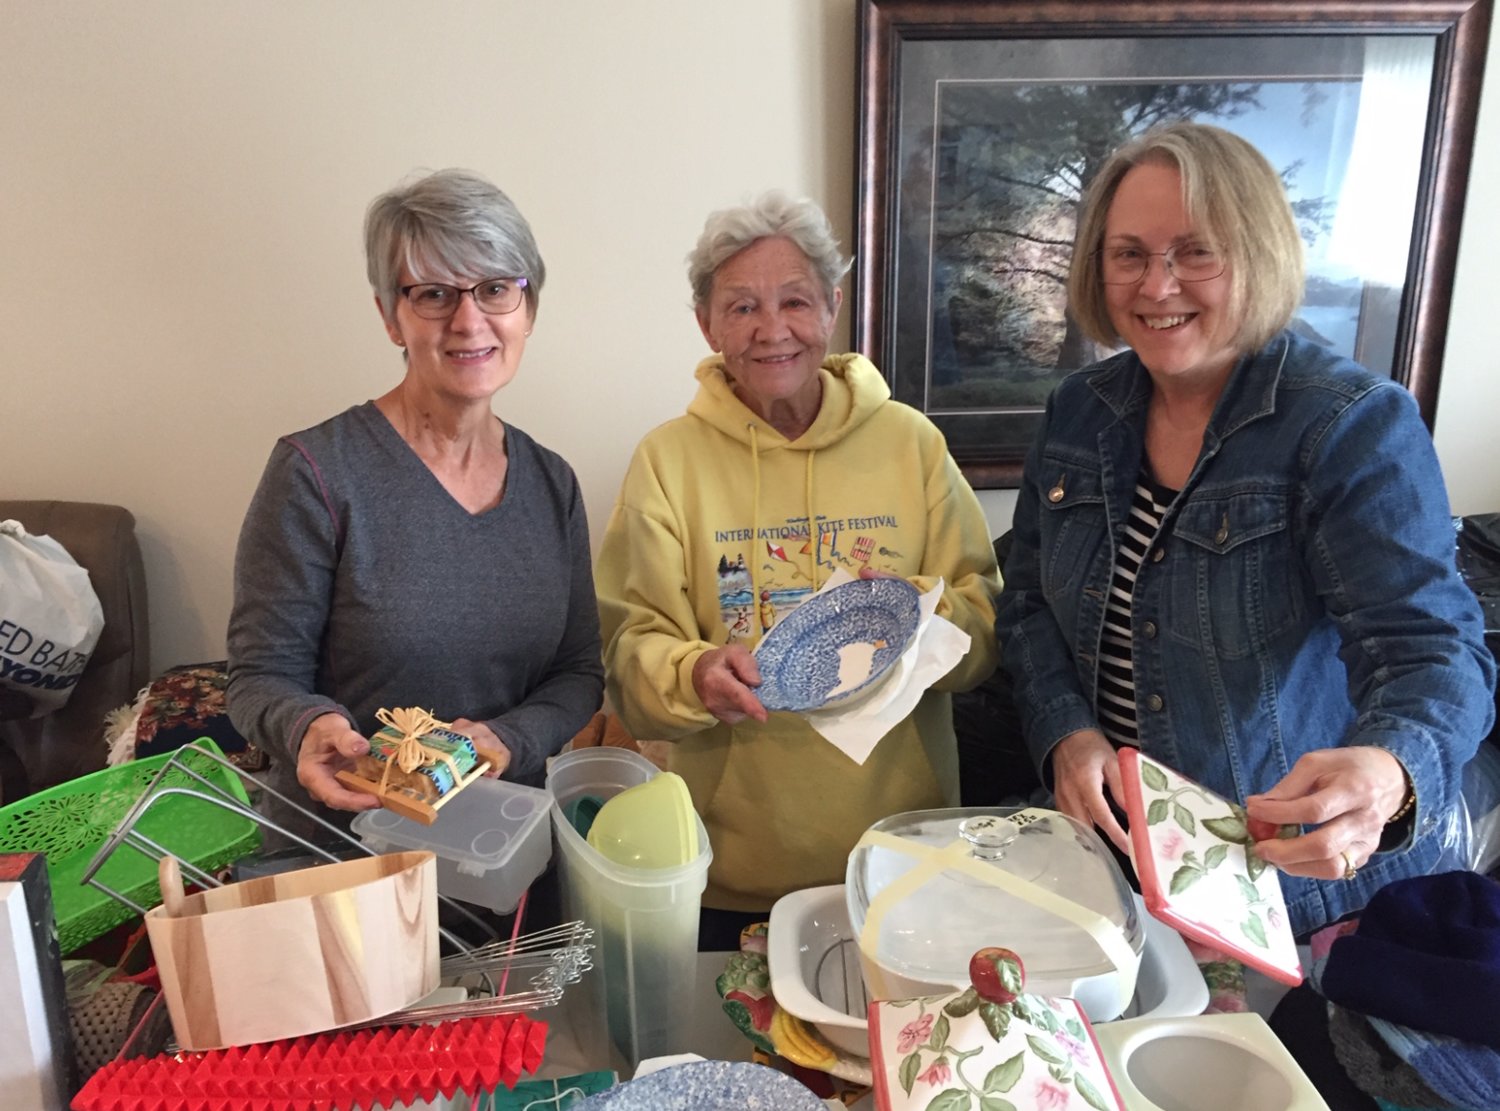 Neighbors of Colleen Hoss help organize items for an upcoming yard sale. Hoss will donate profits from the fundraiser to the Alzheimer’s Association.